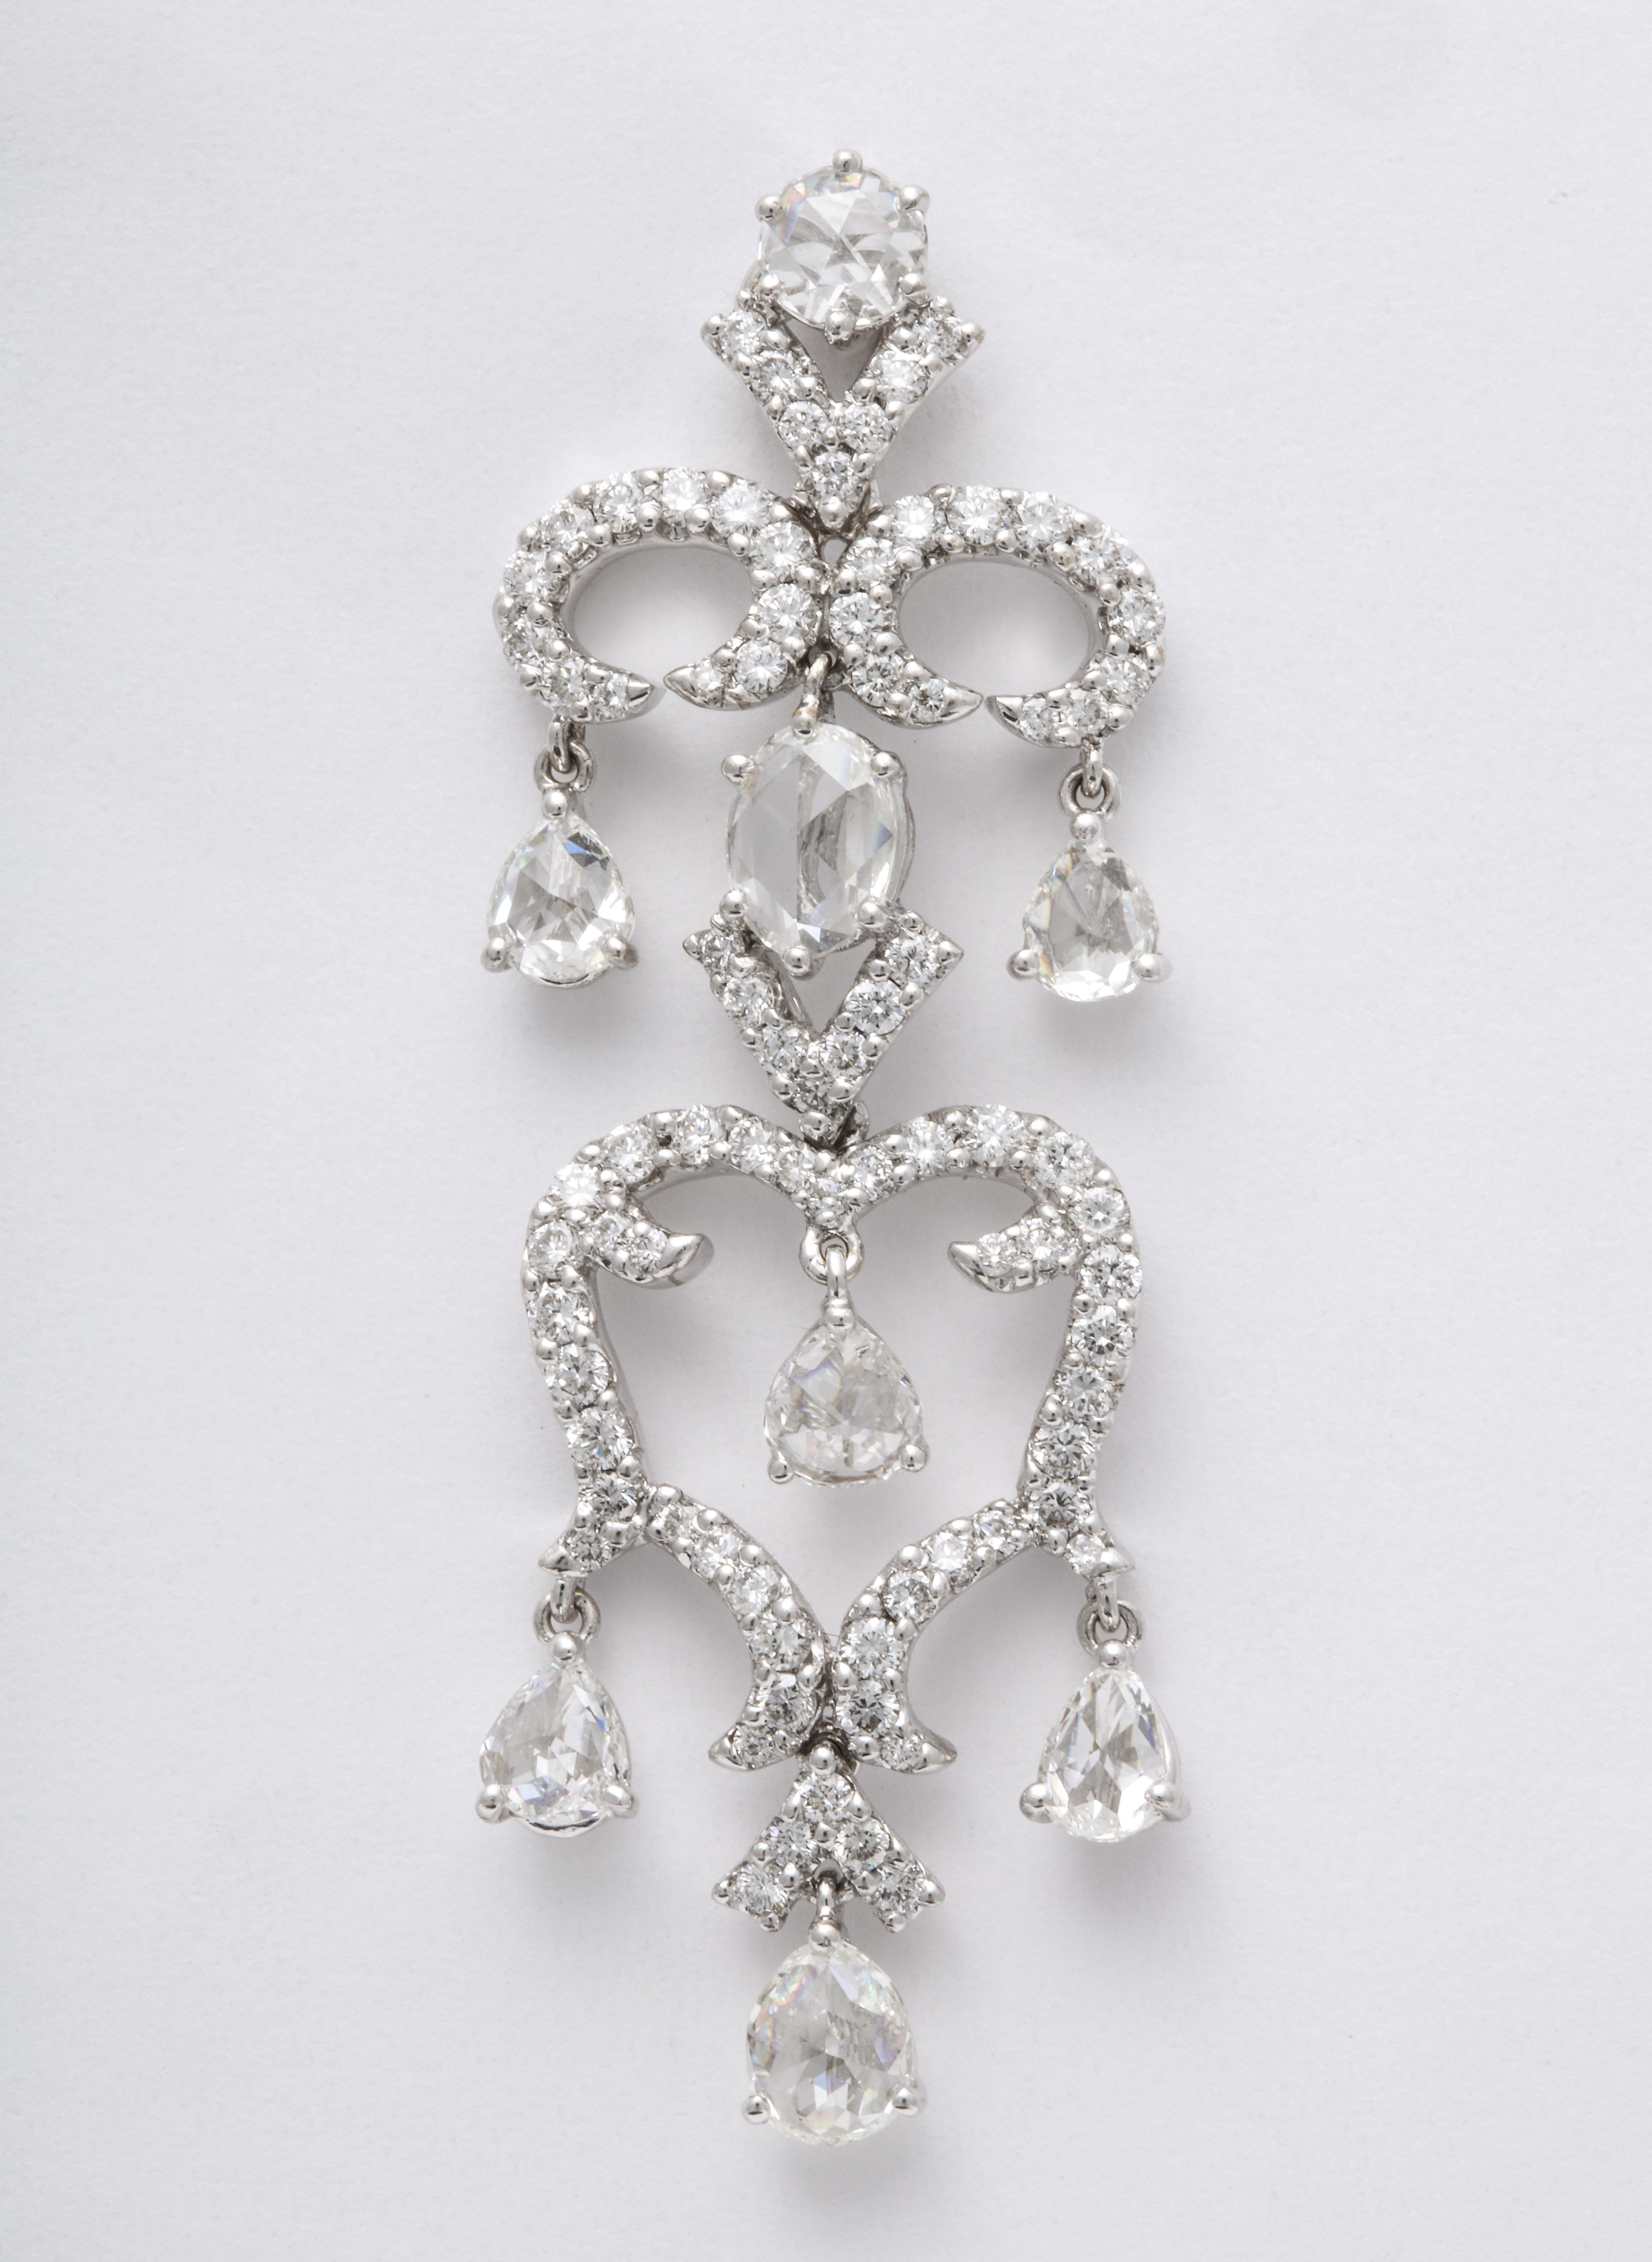 Articulating 18K white gold stylized chandelier earrings decorated with pave'-set round brilliant-cut diamond branches, suspending pear-shape and oval rose-cut diamond drops: 5.13 carats total diamond weight.
These earrings are for pierced ears